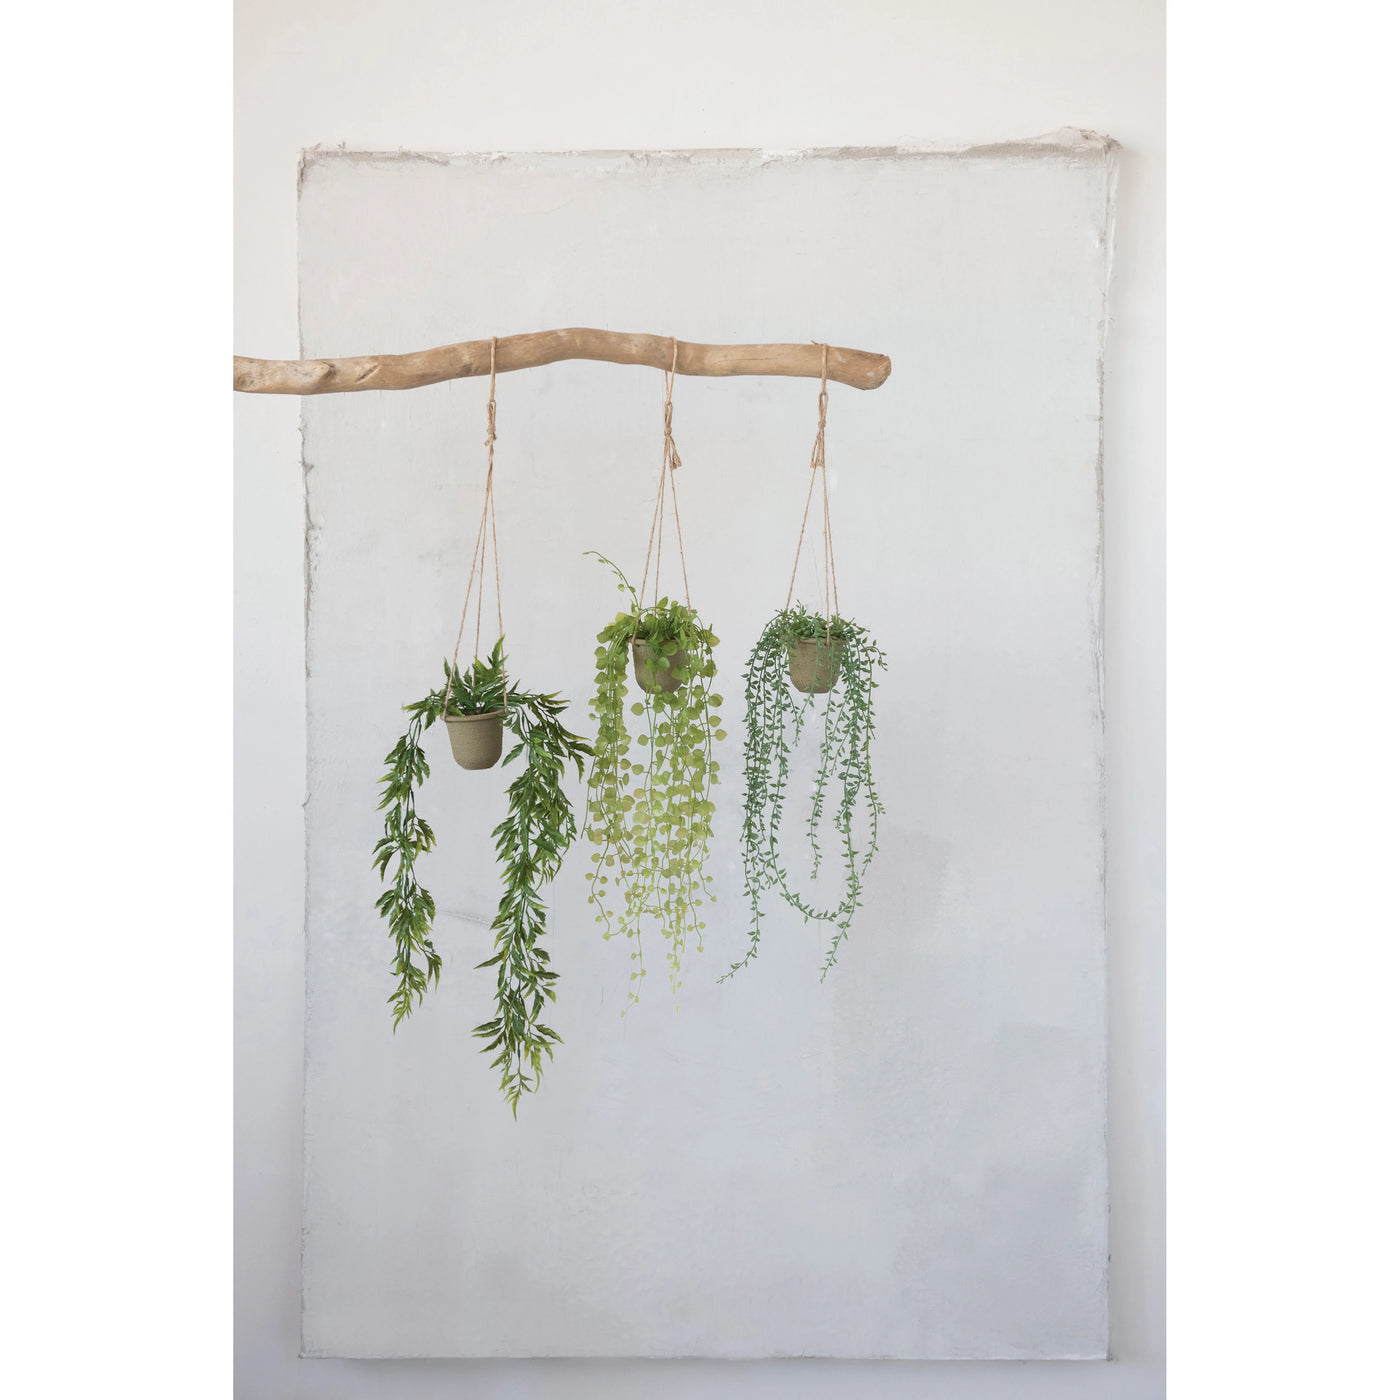 Hanging Faux Ivy/Succulent in Paper Mache Pot with Jute Hanger, 3 Styles